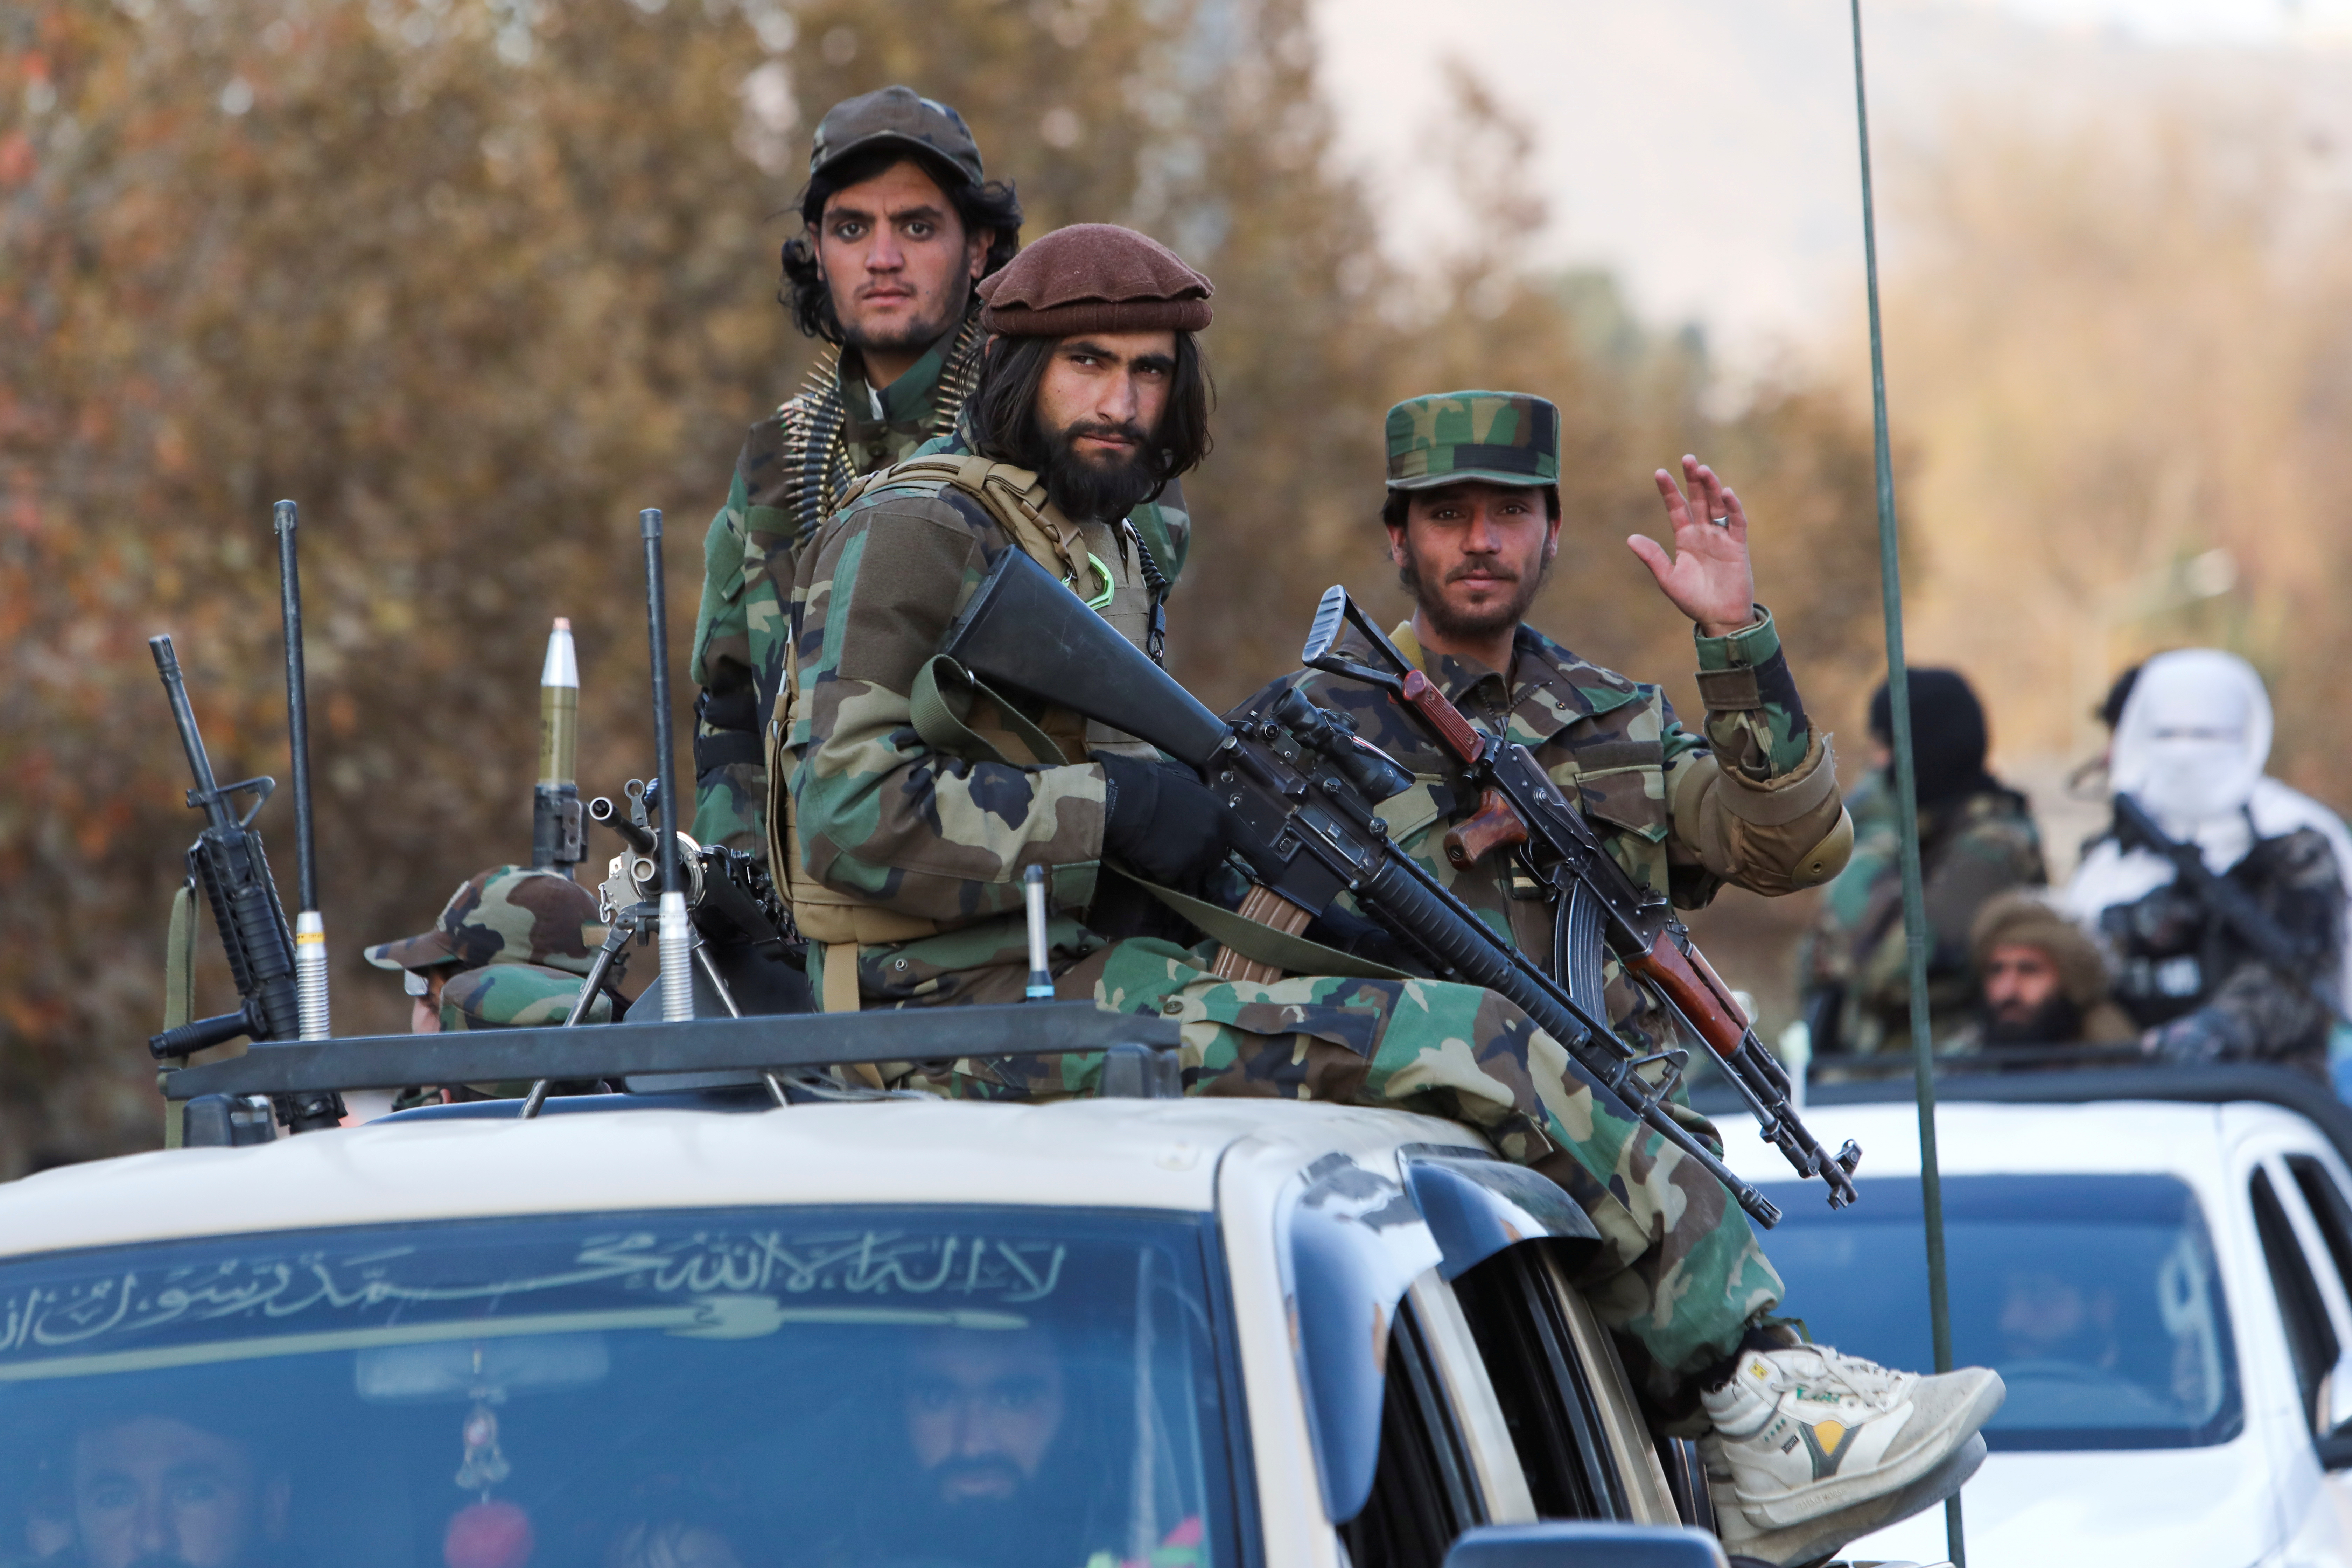 Members of Taliban sit on a military vehicle during Taliban military parade in Kabul